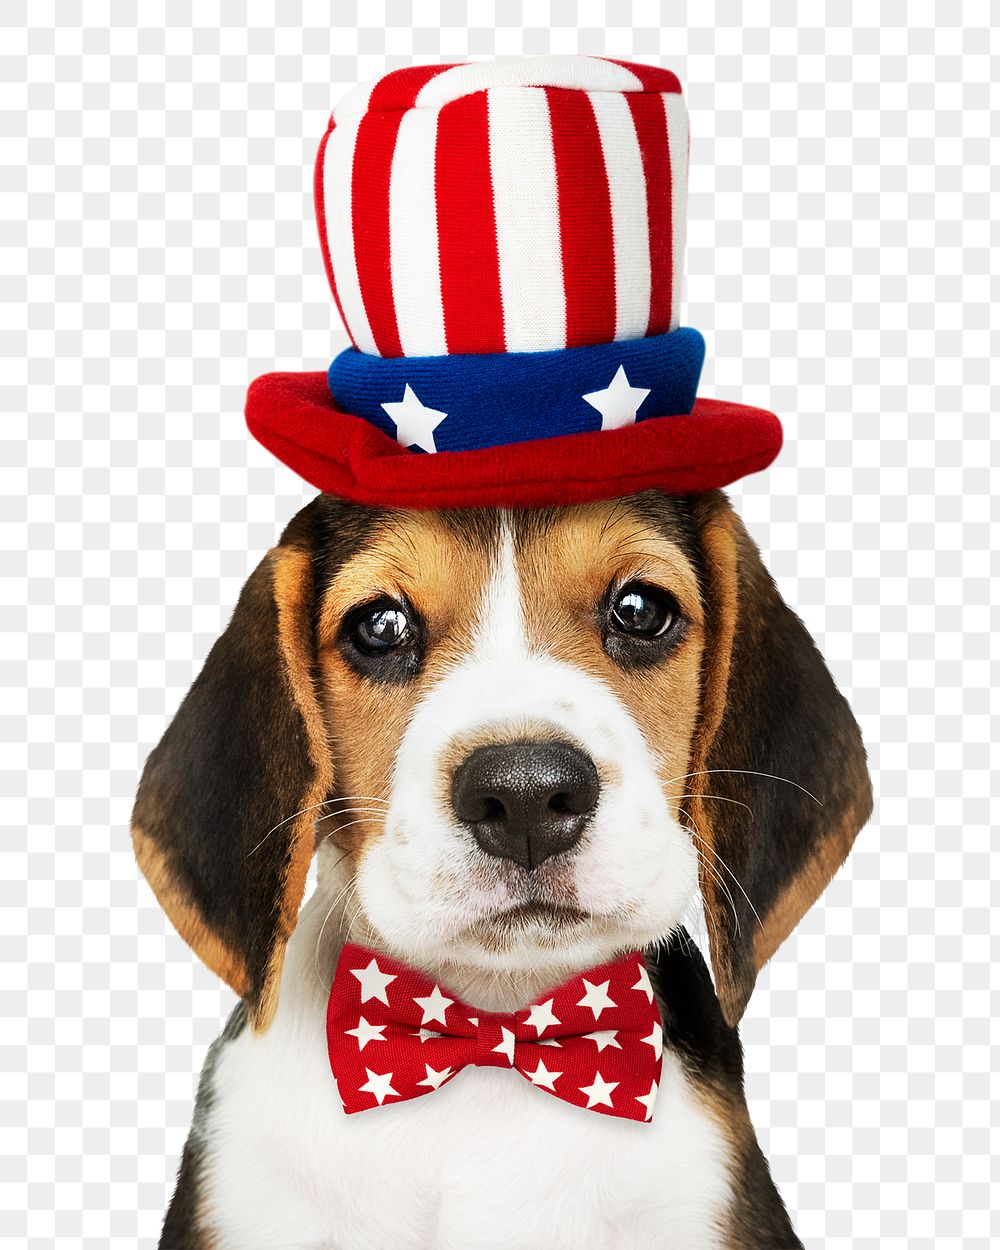 Puppy png sticker, wearing uncle Sam costume, cute collage element on transparent background